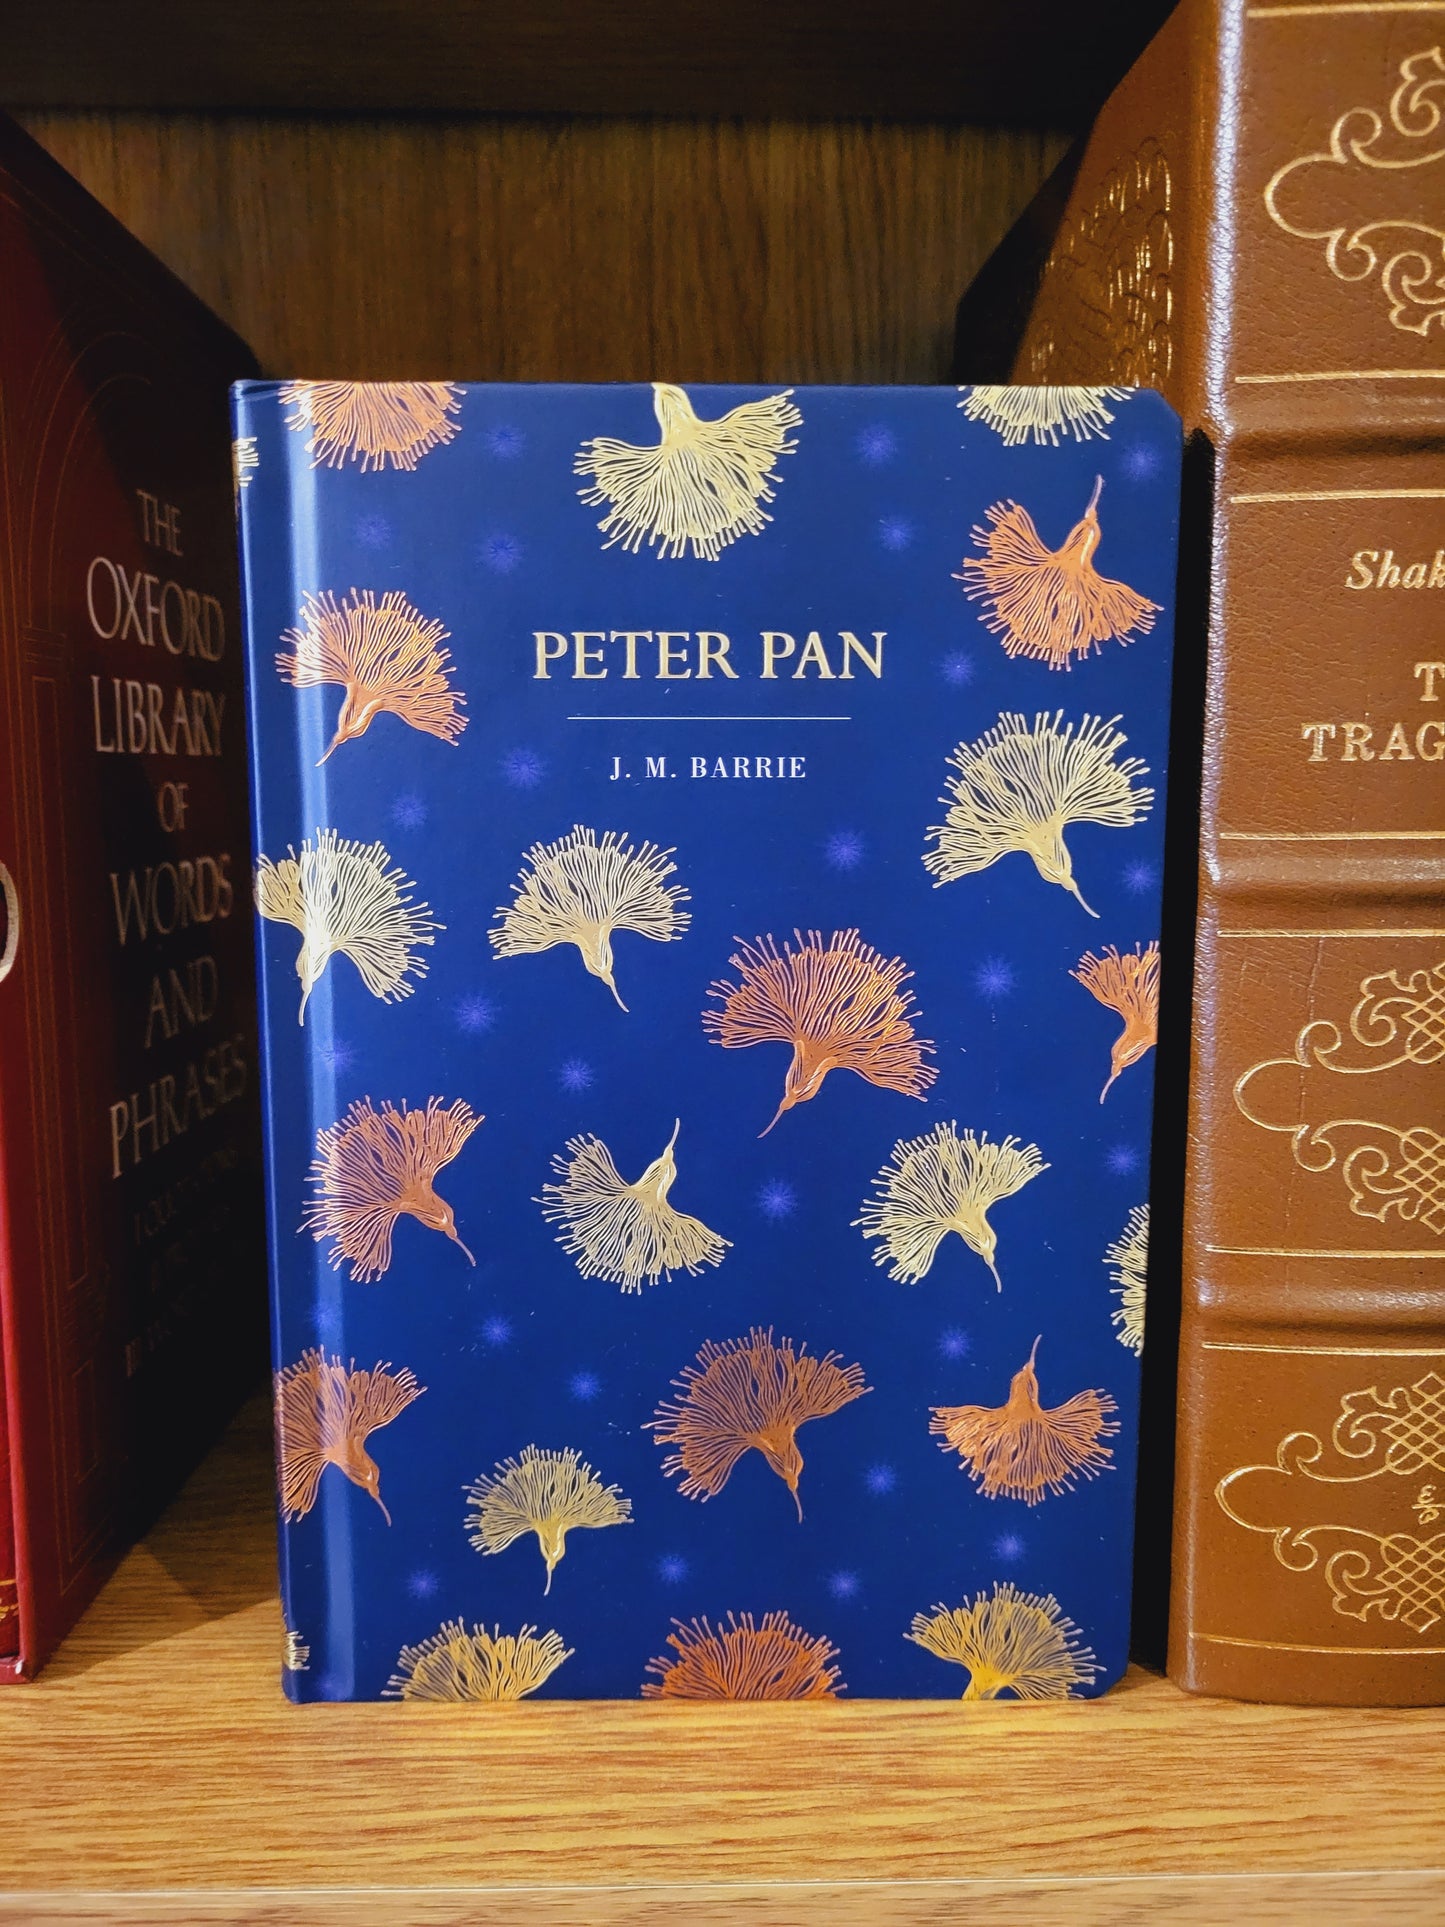 Peter Pan - J.M. Barrie (Chiltern Edition)